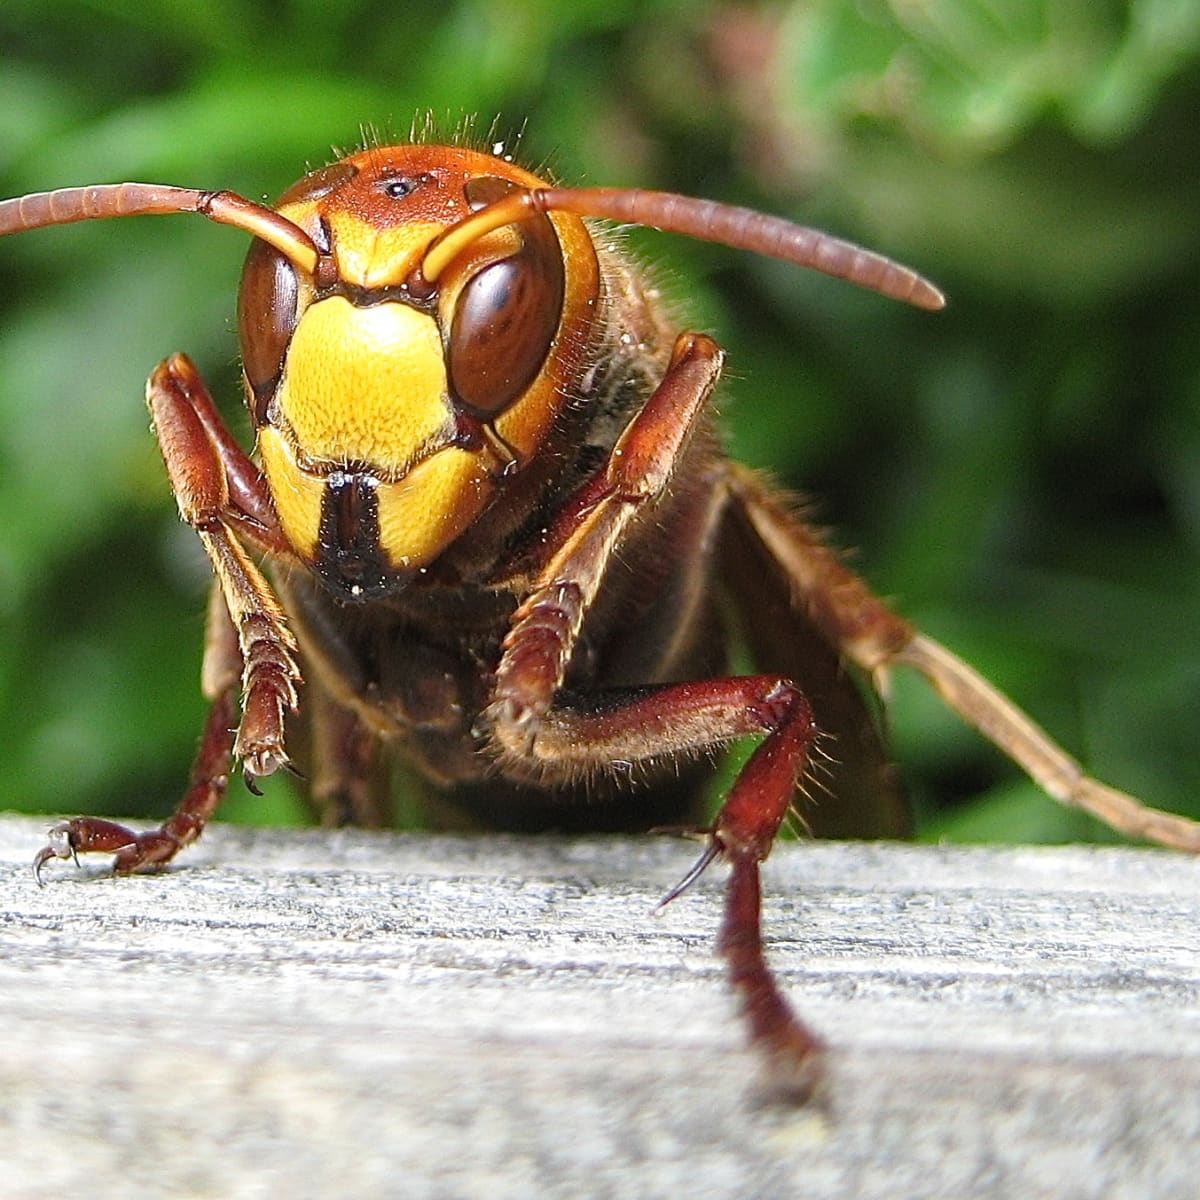 Giant wasps are emerging across Pennsylvania, but they're native